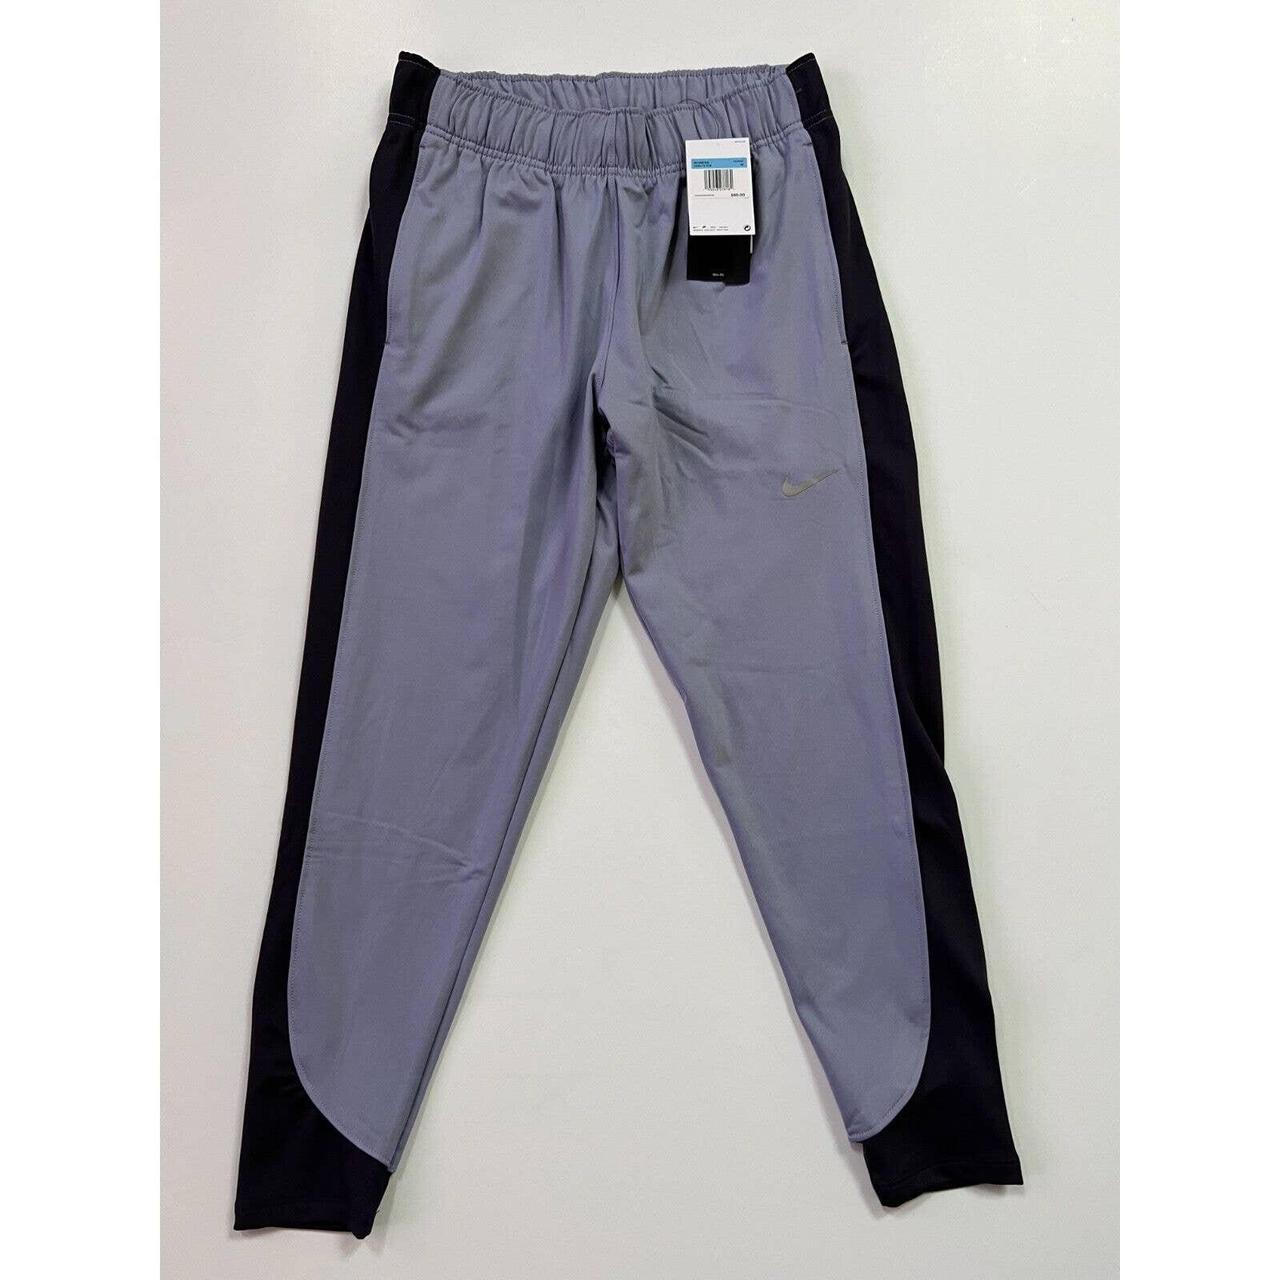 Nike Therma-FIT Essential Women s Running Pants 